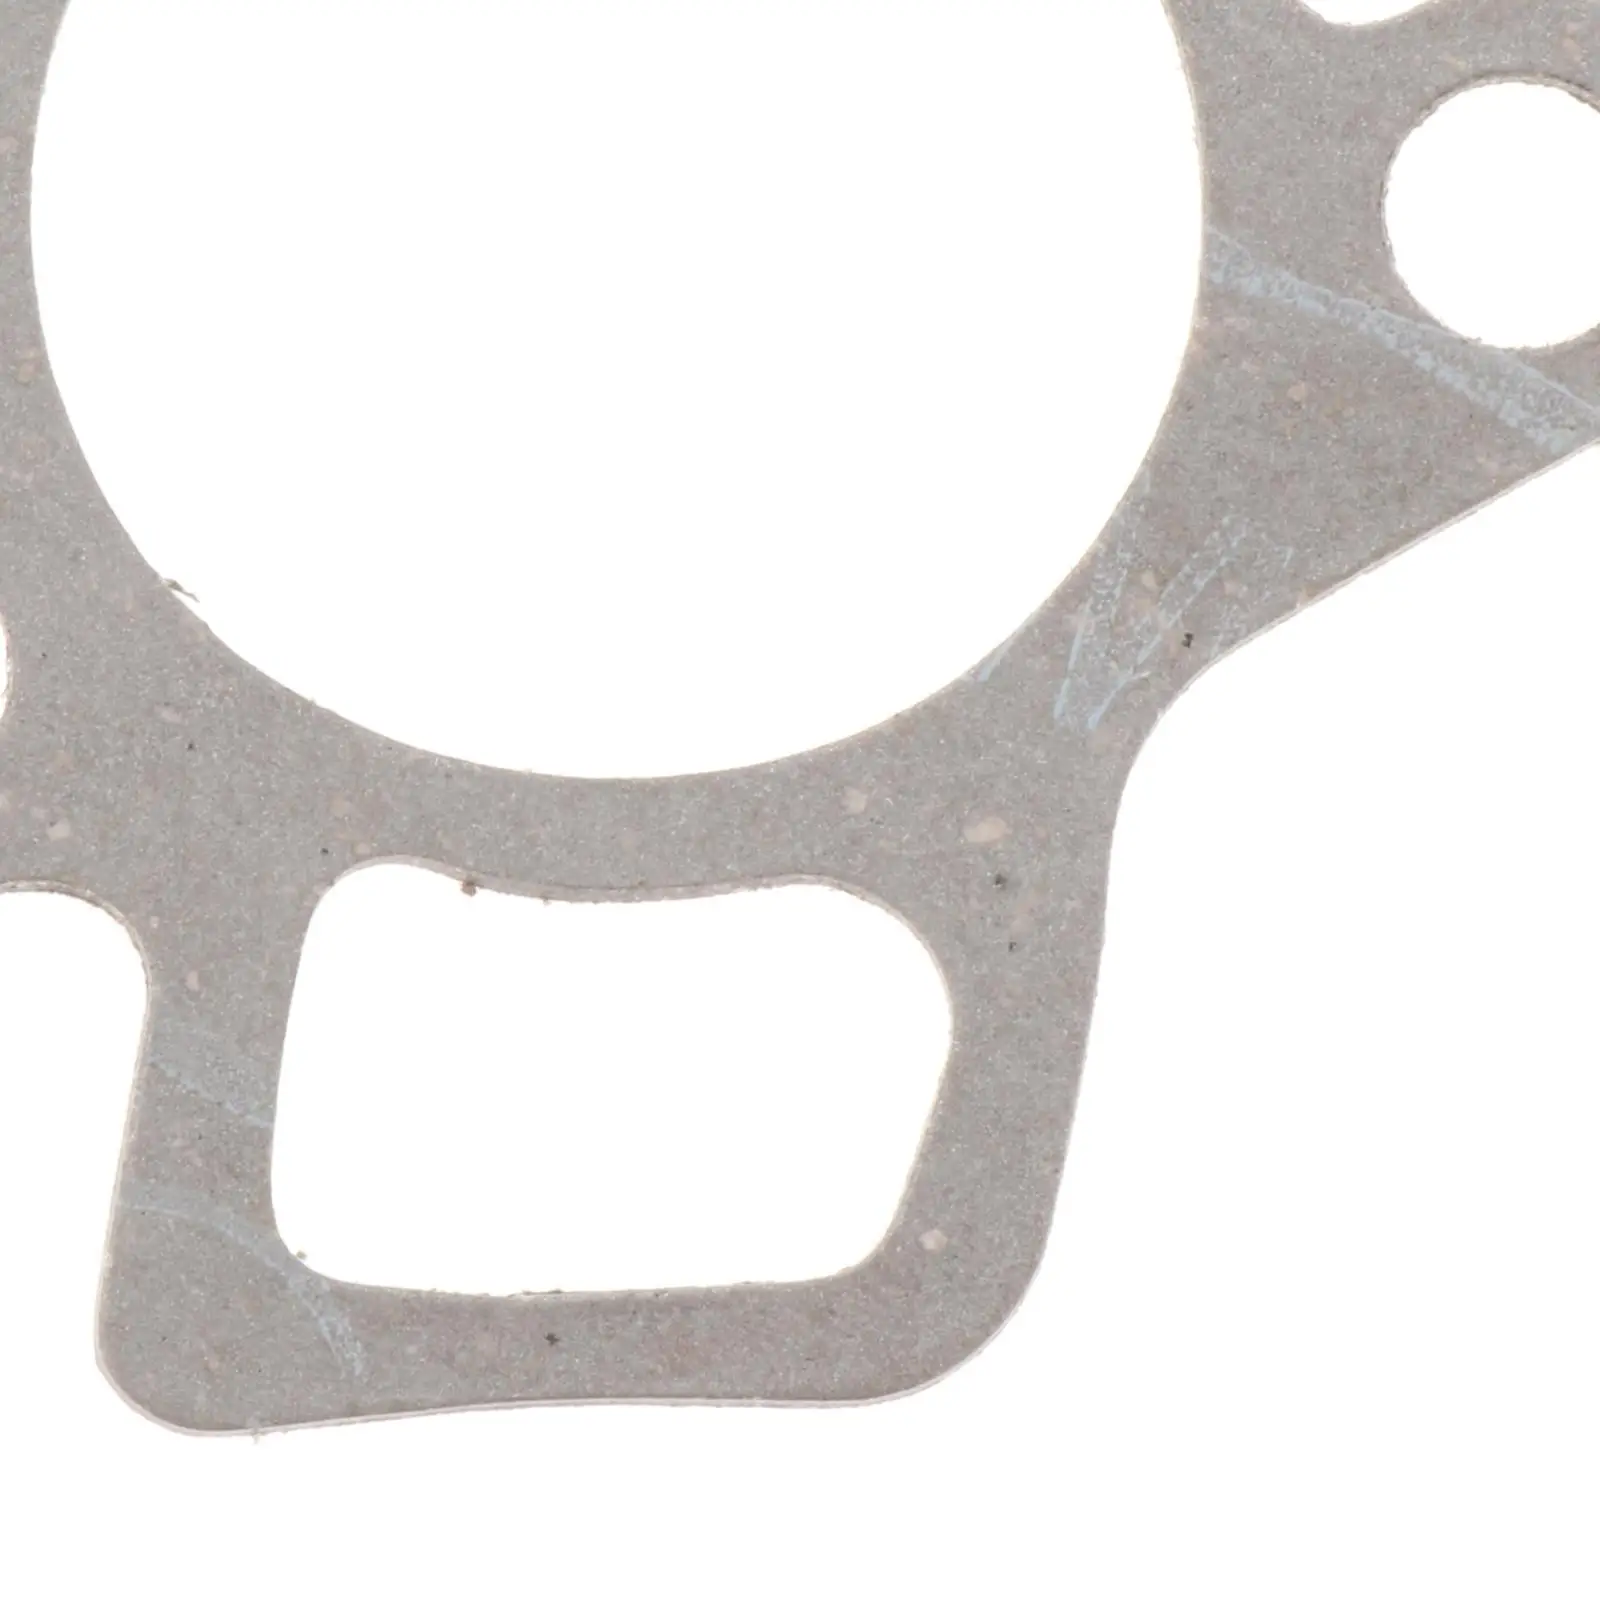 Thermostat Gasket 541-25 6H3-12414-A1 Fit for Yamaha Outboard Engine 9.9-70 HP Replacement High Performance Accessories